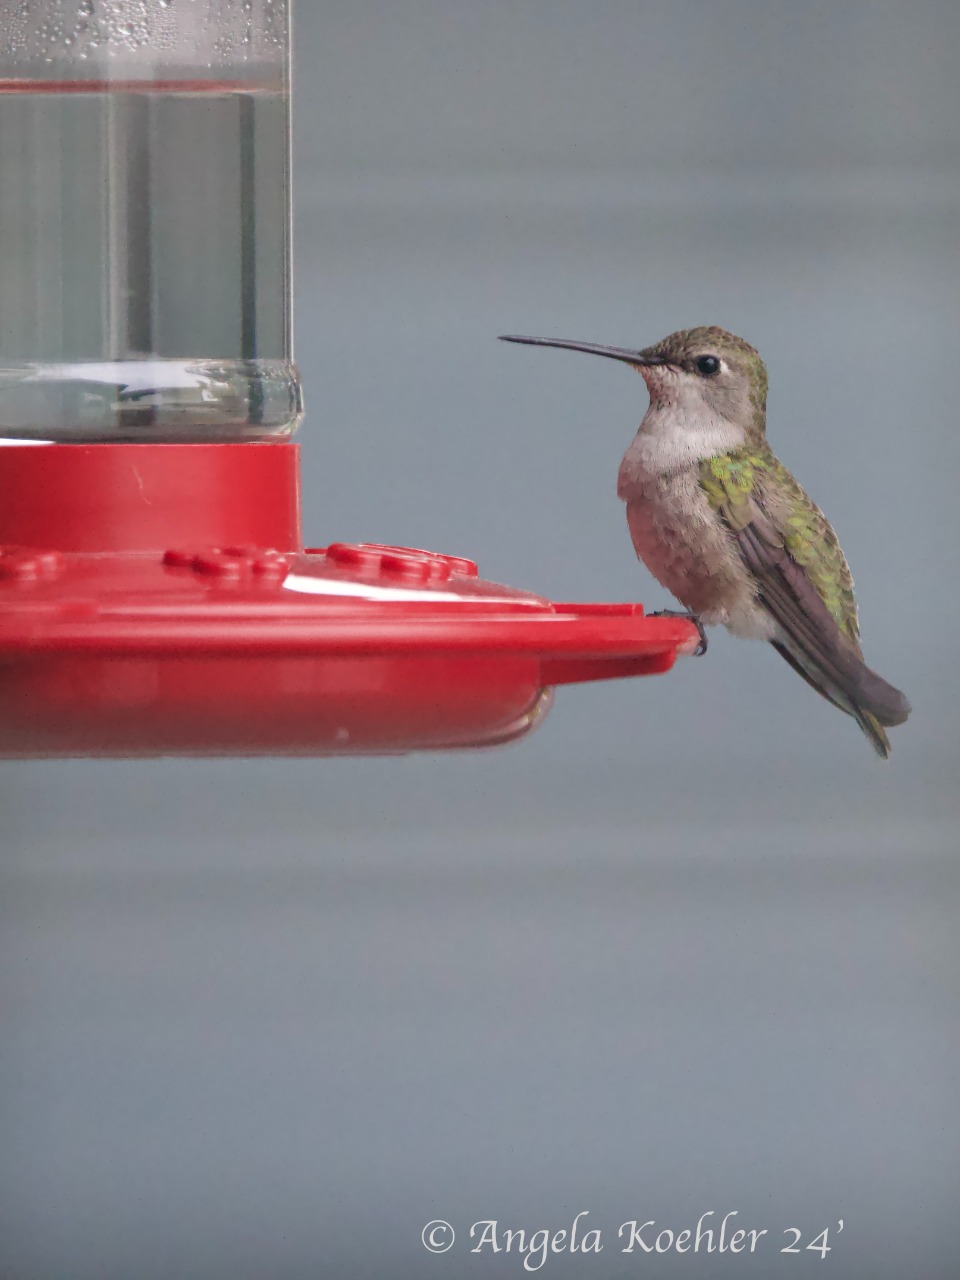 A vertical photo showing a female hummingbird perched on a red feeder with clear liquid. Watermark Angela Koehler 24'